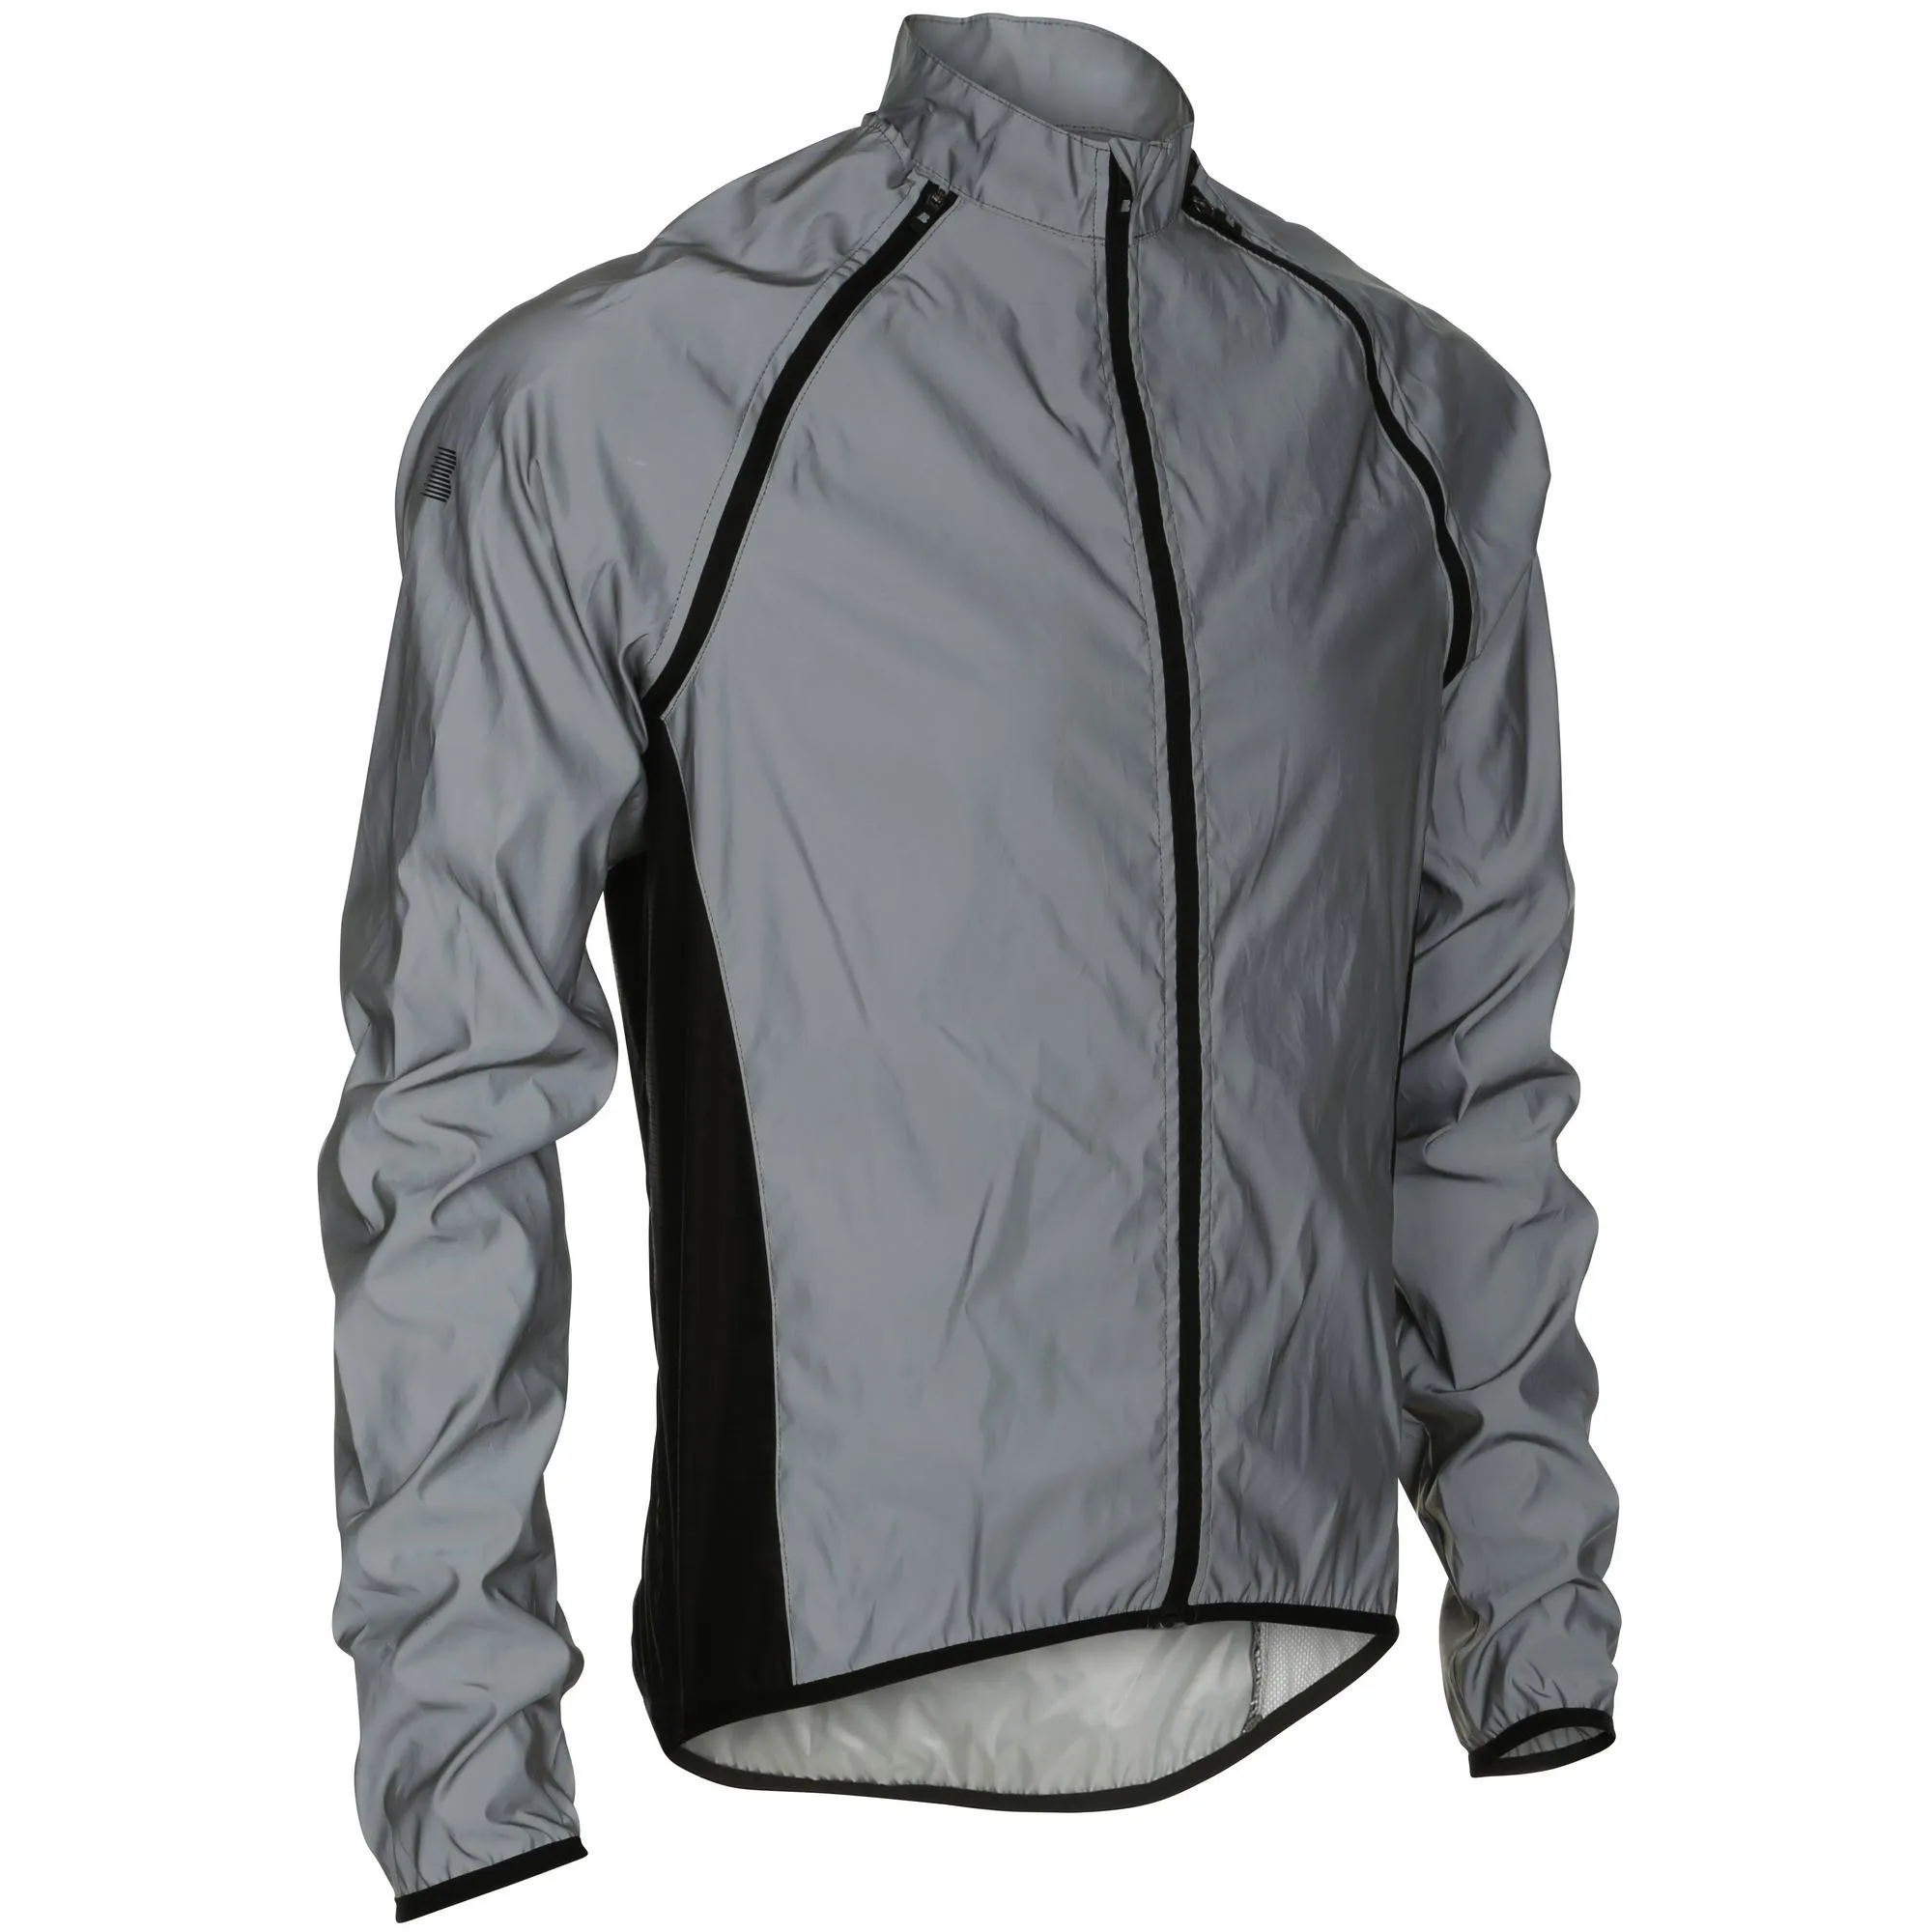 mens cycling jacket with removable sleeves